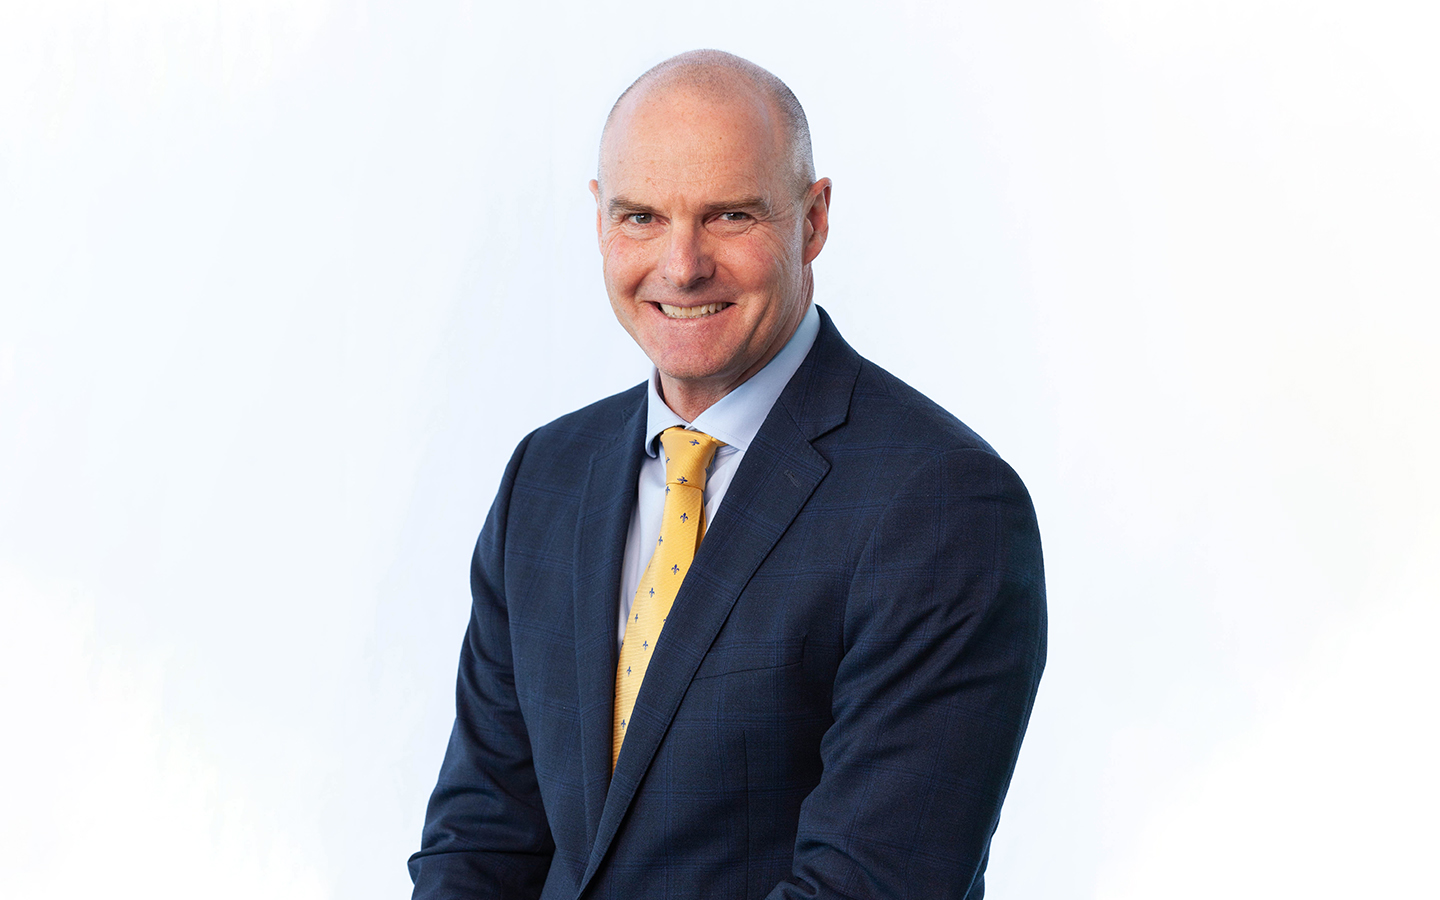 Senior Vice President, Supply Chain & Operational Excellence Greg Bodkin